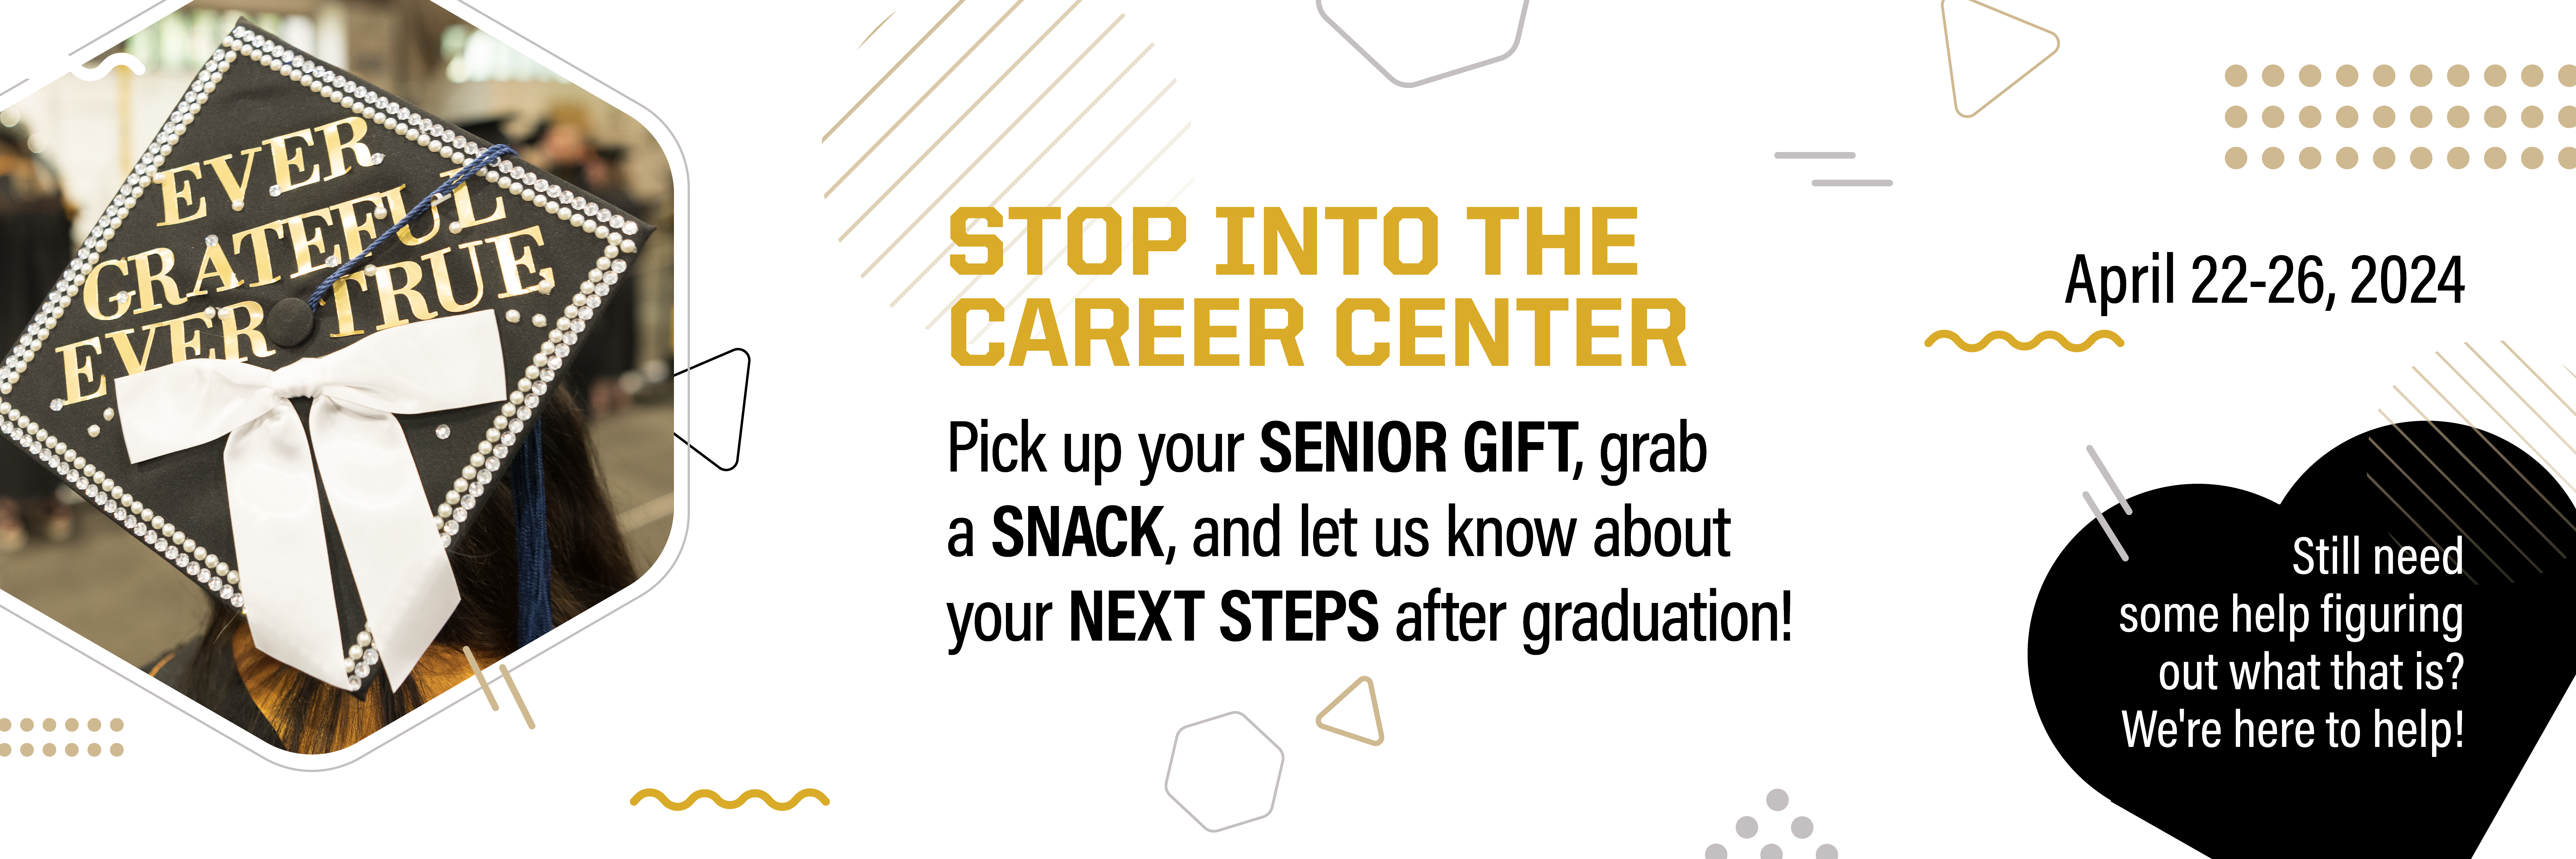 Stop into the Career Center. Pick up your senior gift, grab a snack, and let us know about your next steps after graduation! April 22-26, 2024.